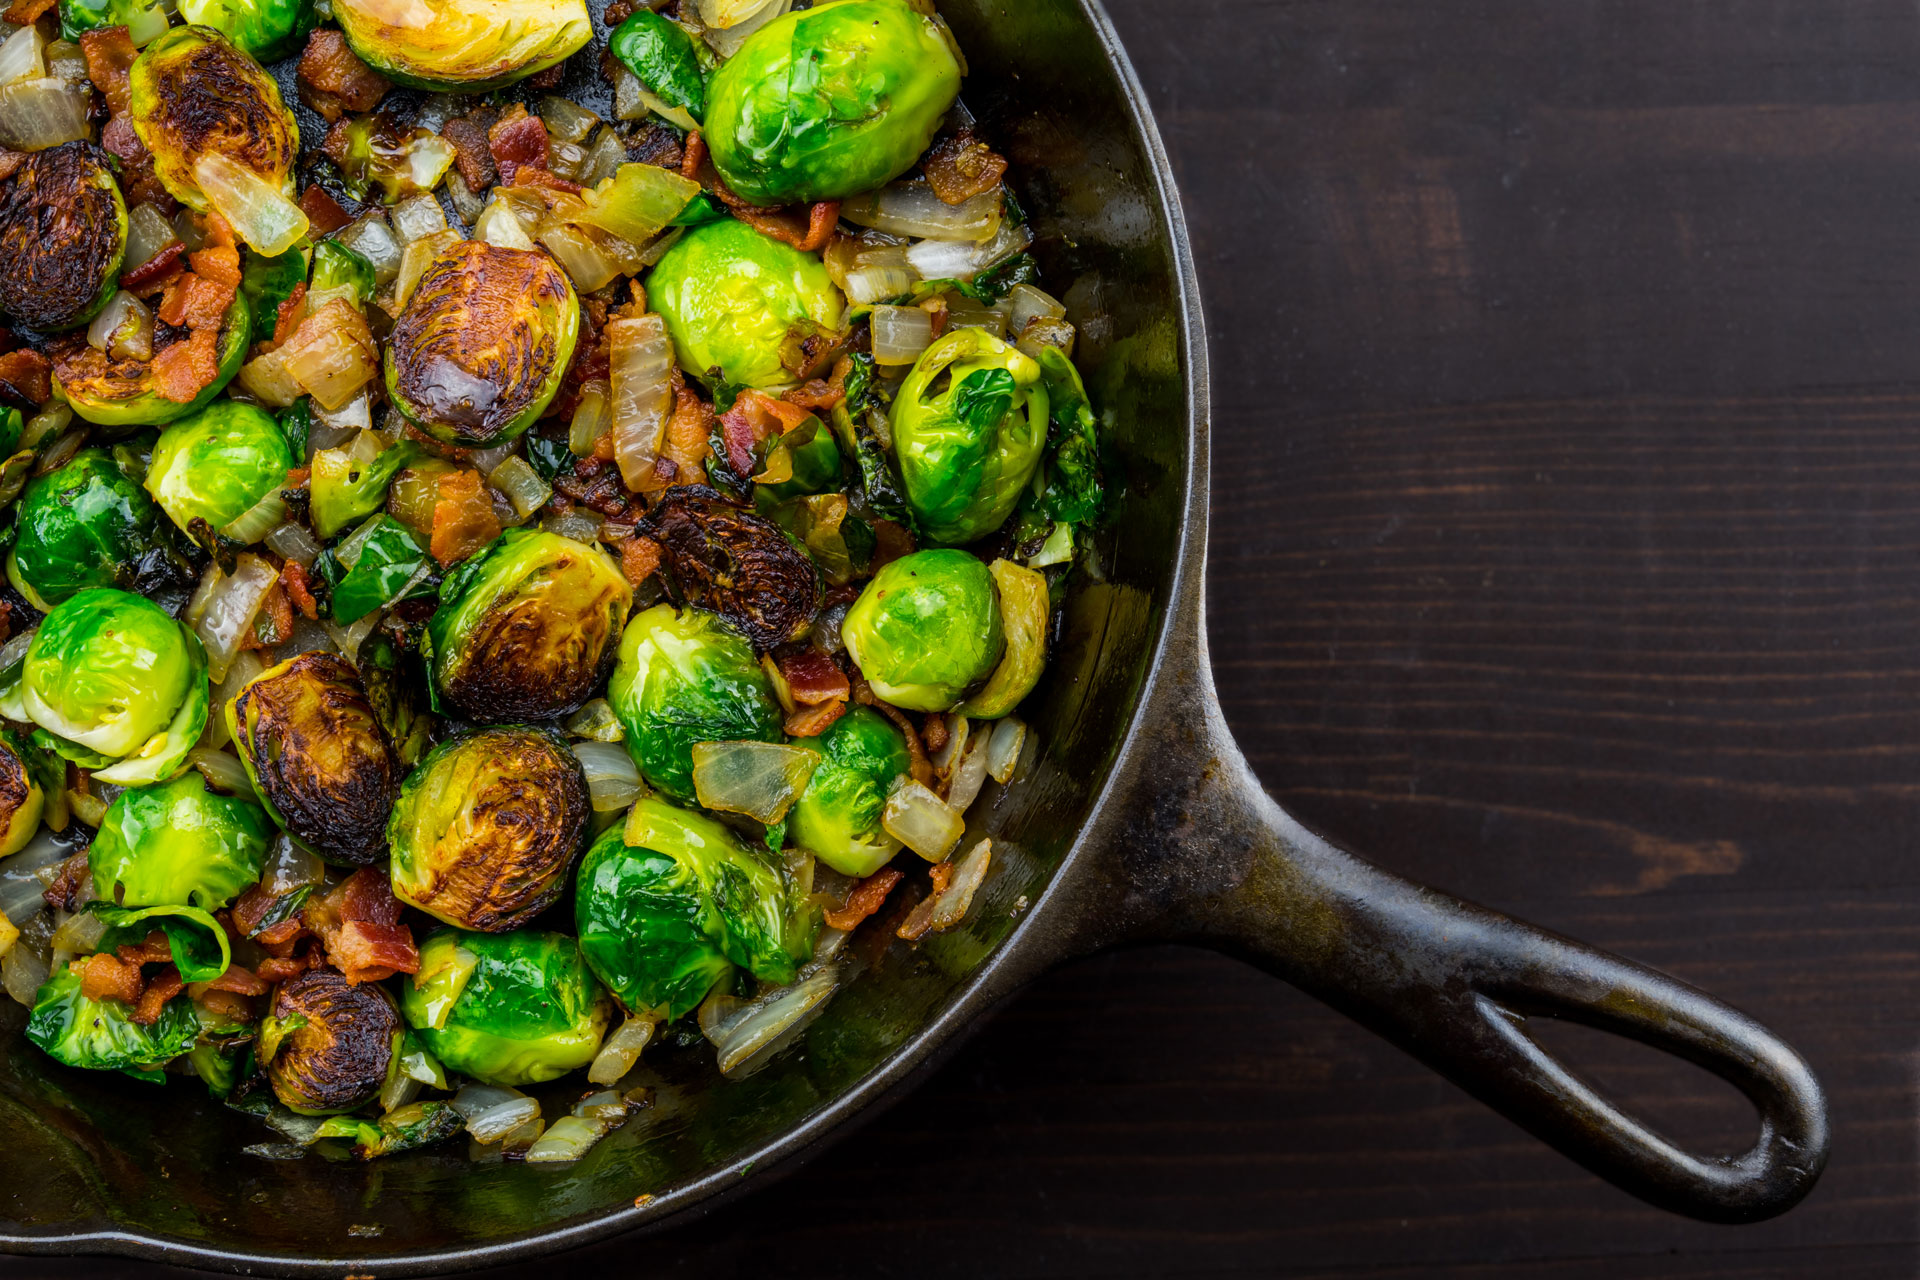 Ingredient of the Week: Brussels Sprouts